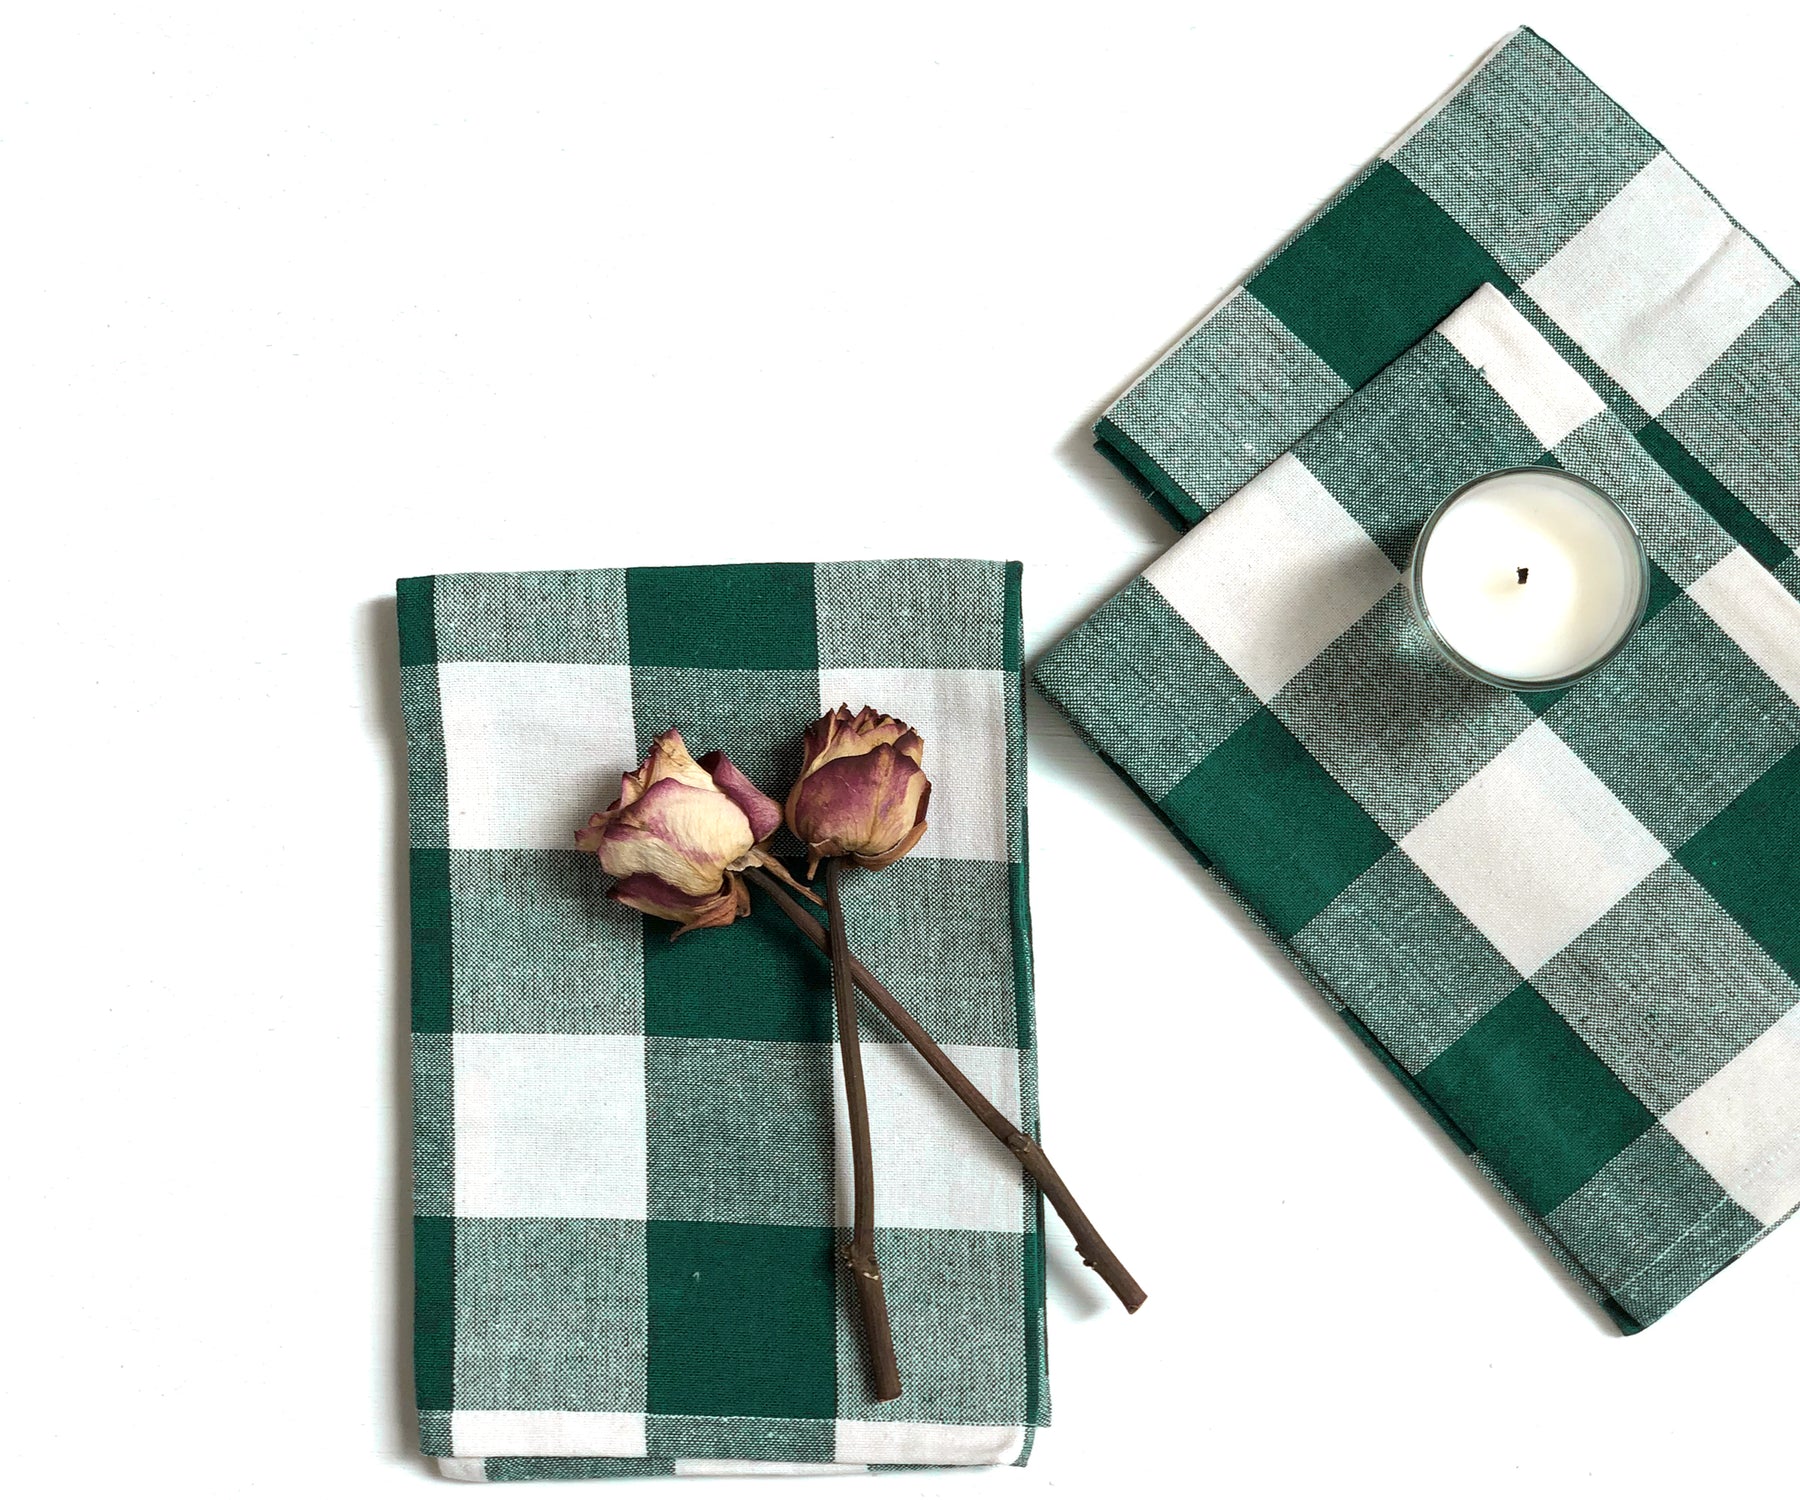 These green and white striped dish towels are made from a soft and absorbent cotton blend, and their fun pattern will add a touch of color to your kitchen.